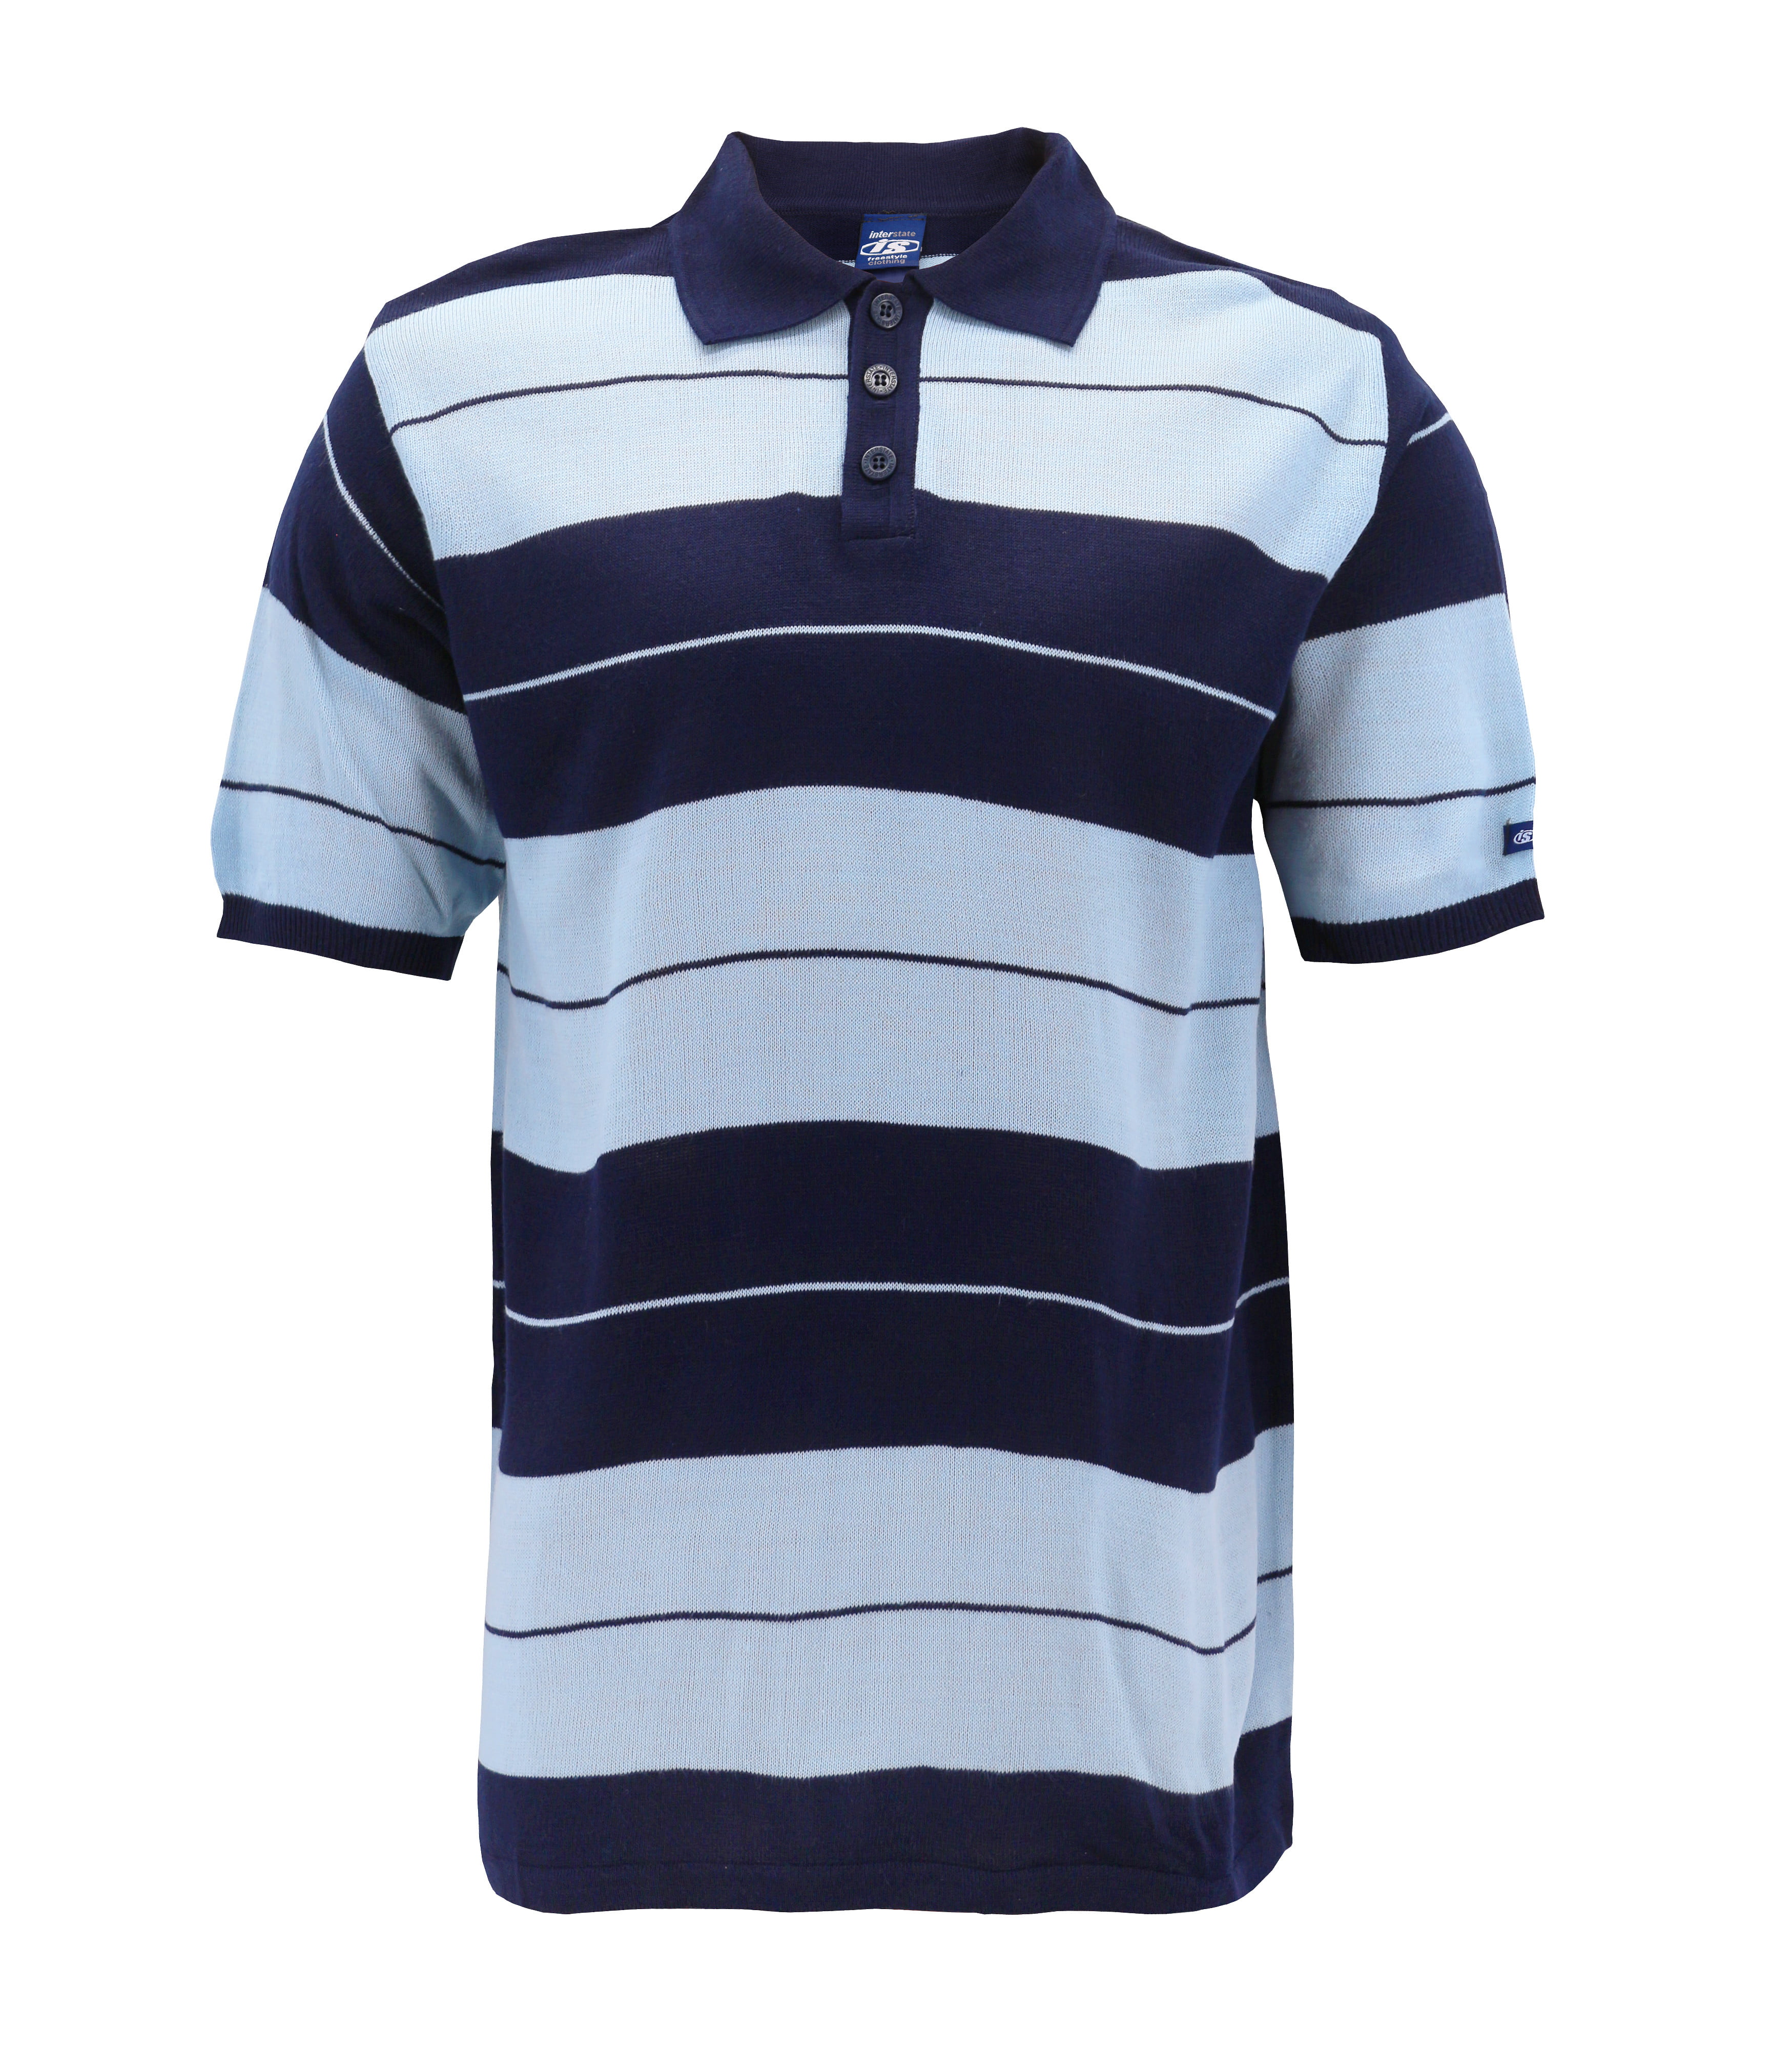 Men's Knitted Charlie Brown Striped Ribbed Short Sleeve Casual Polo ...